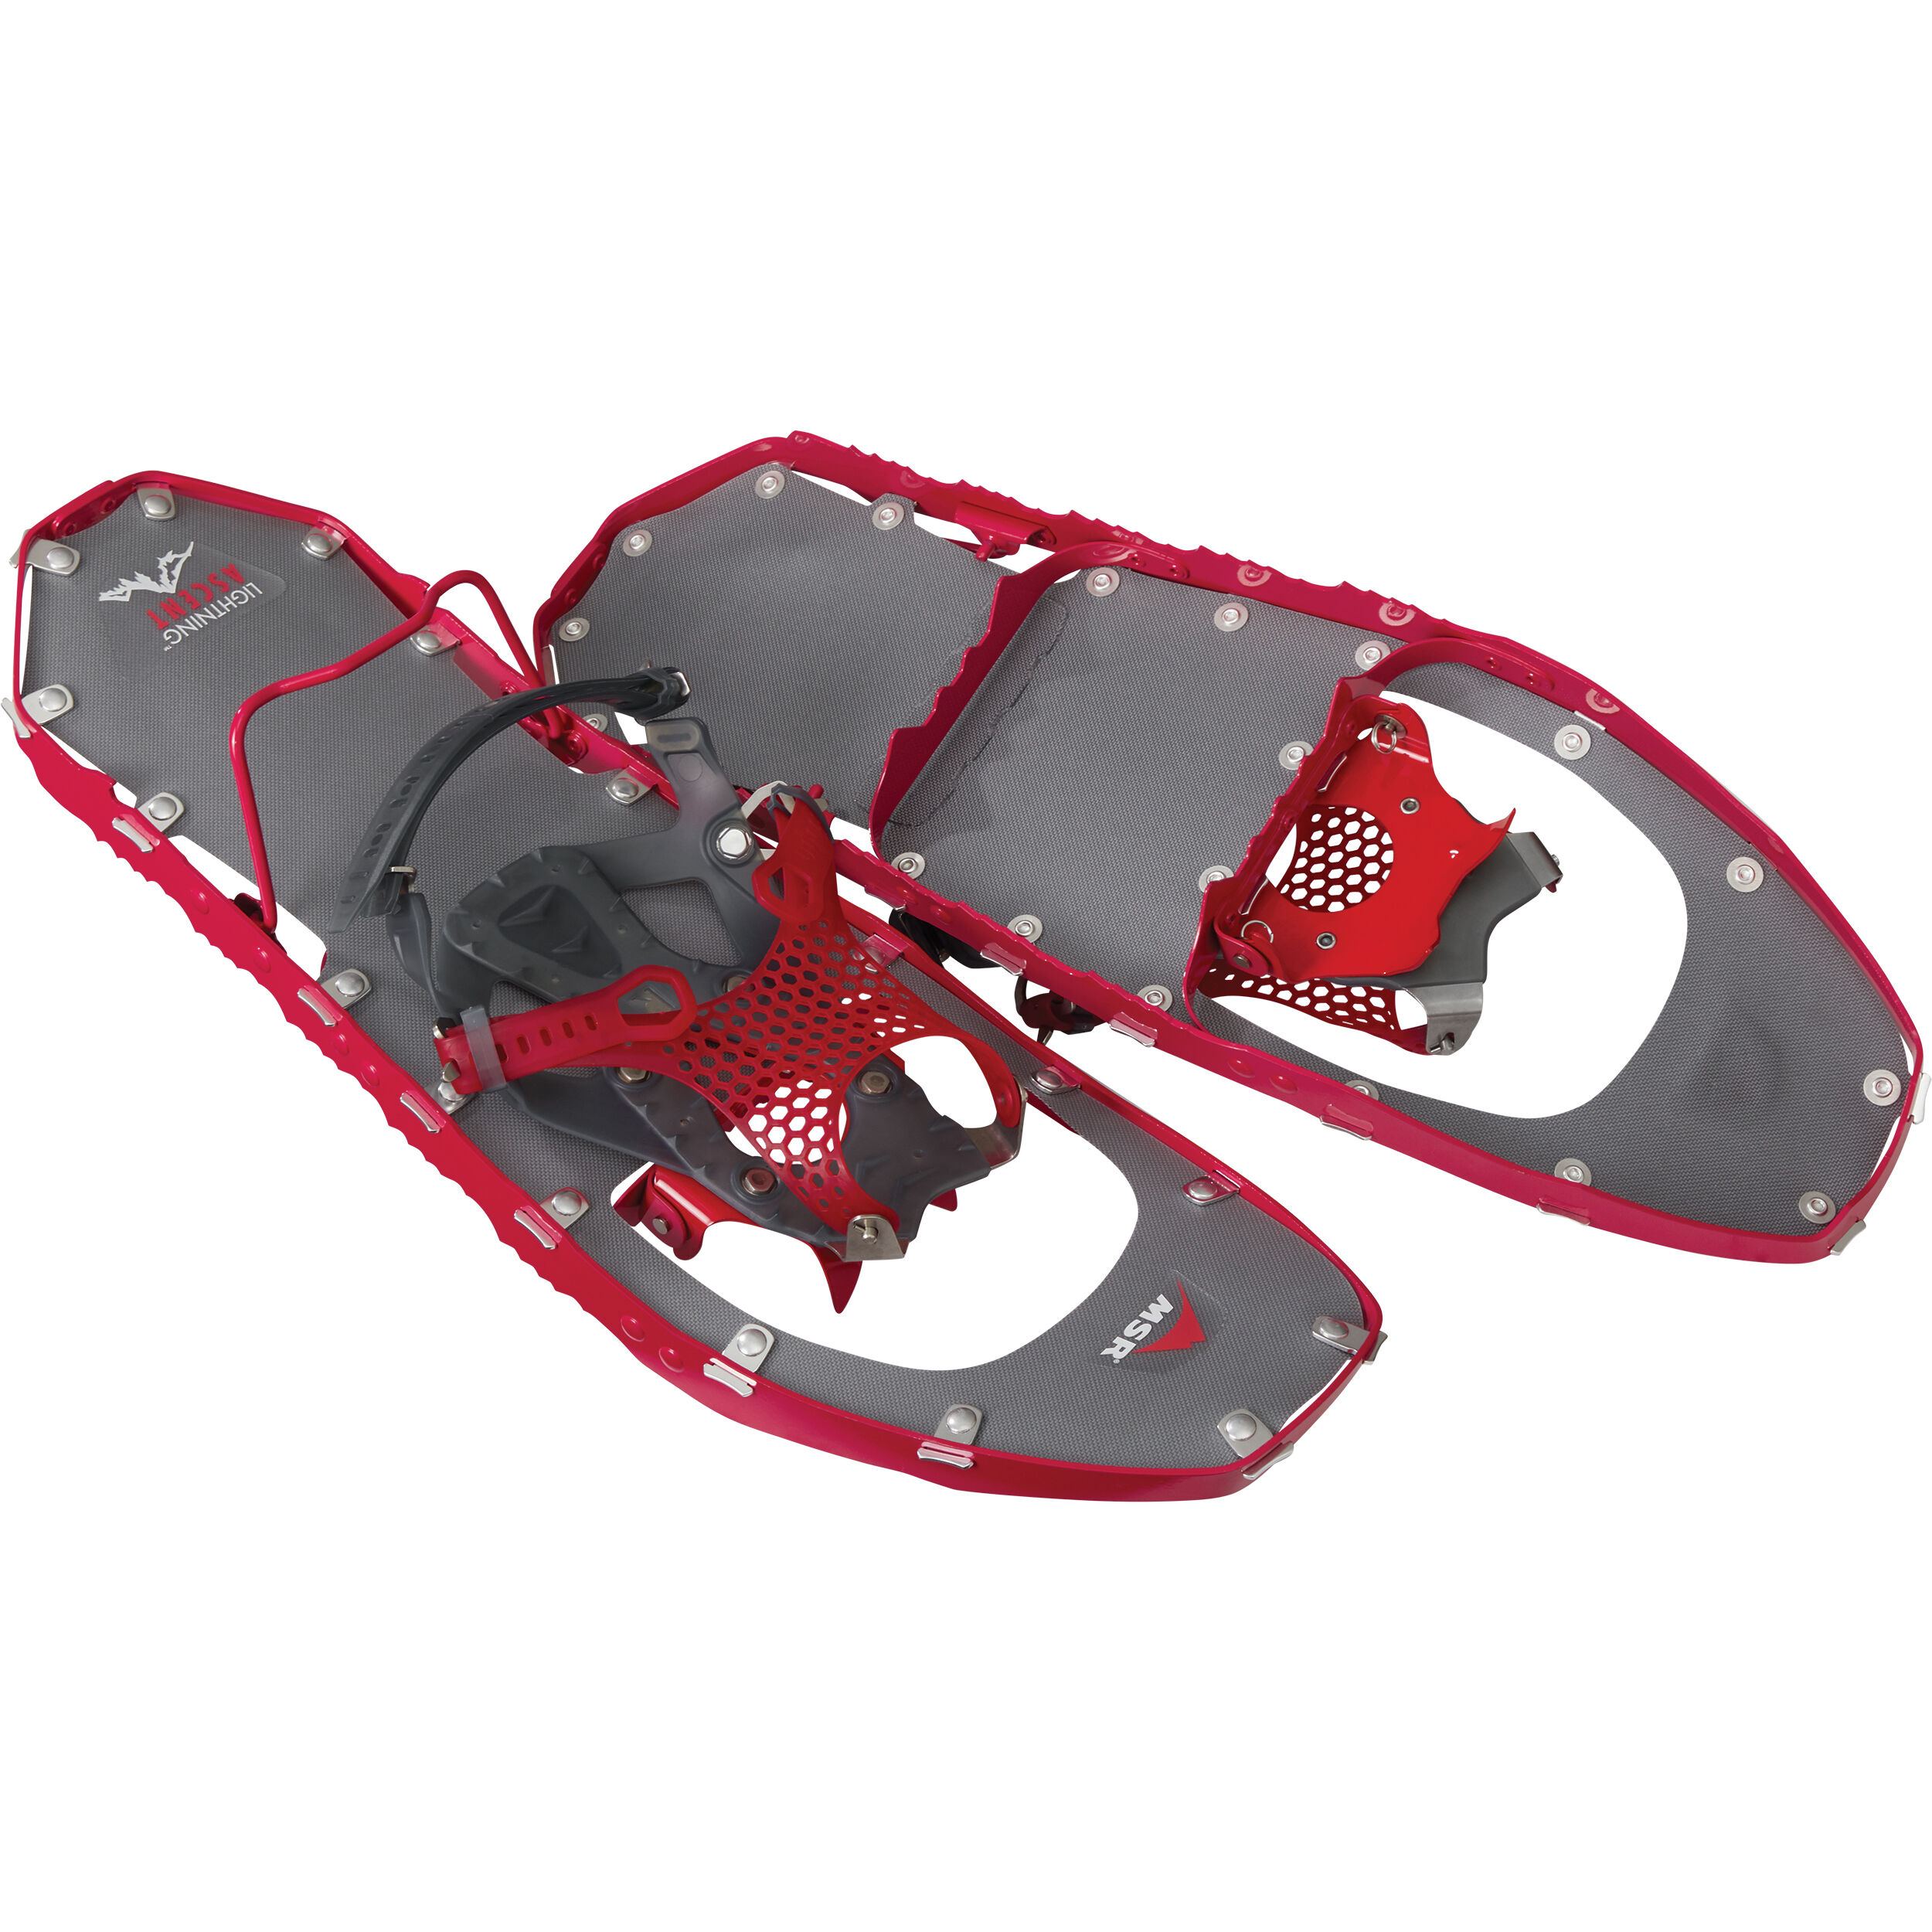 MSR Lightning Ascent Backcountry & Mountaineering Snowshoes with Paragon Bindings 